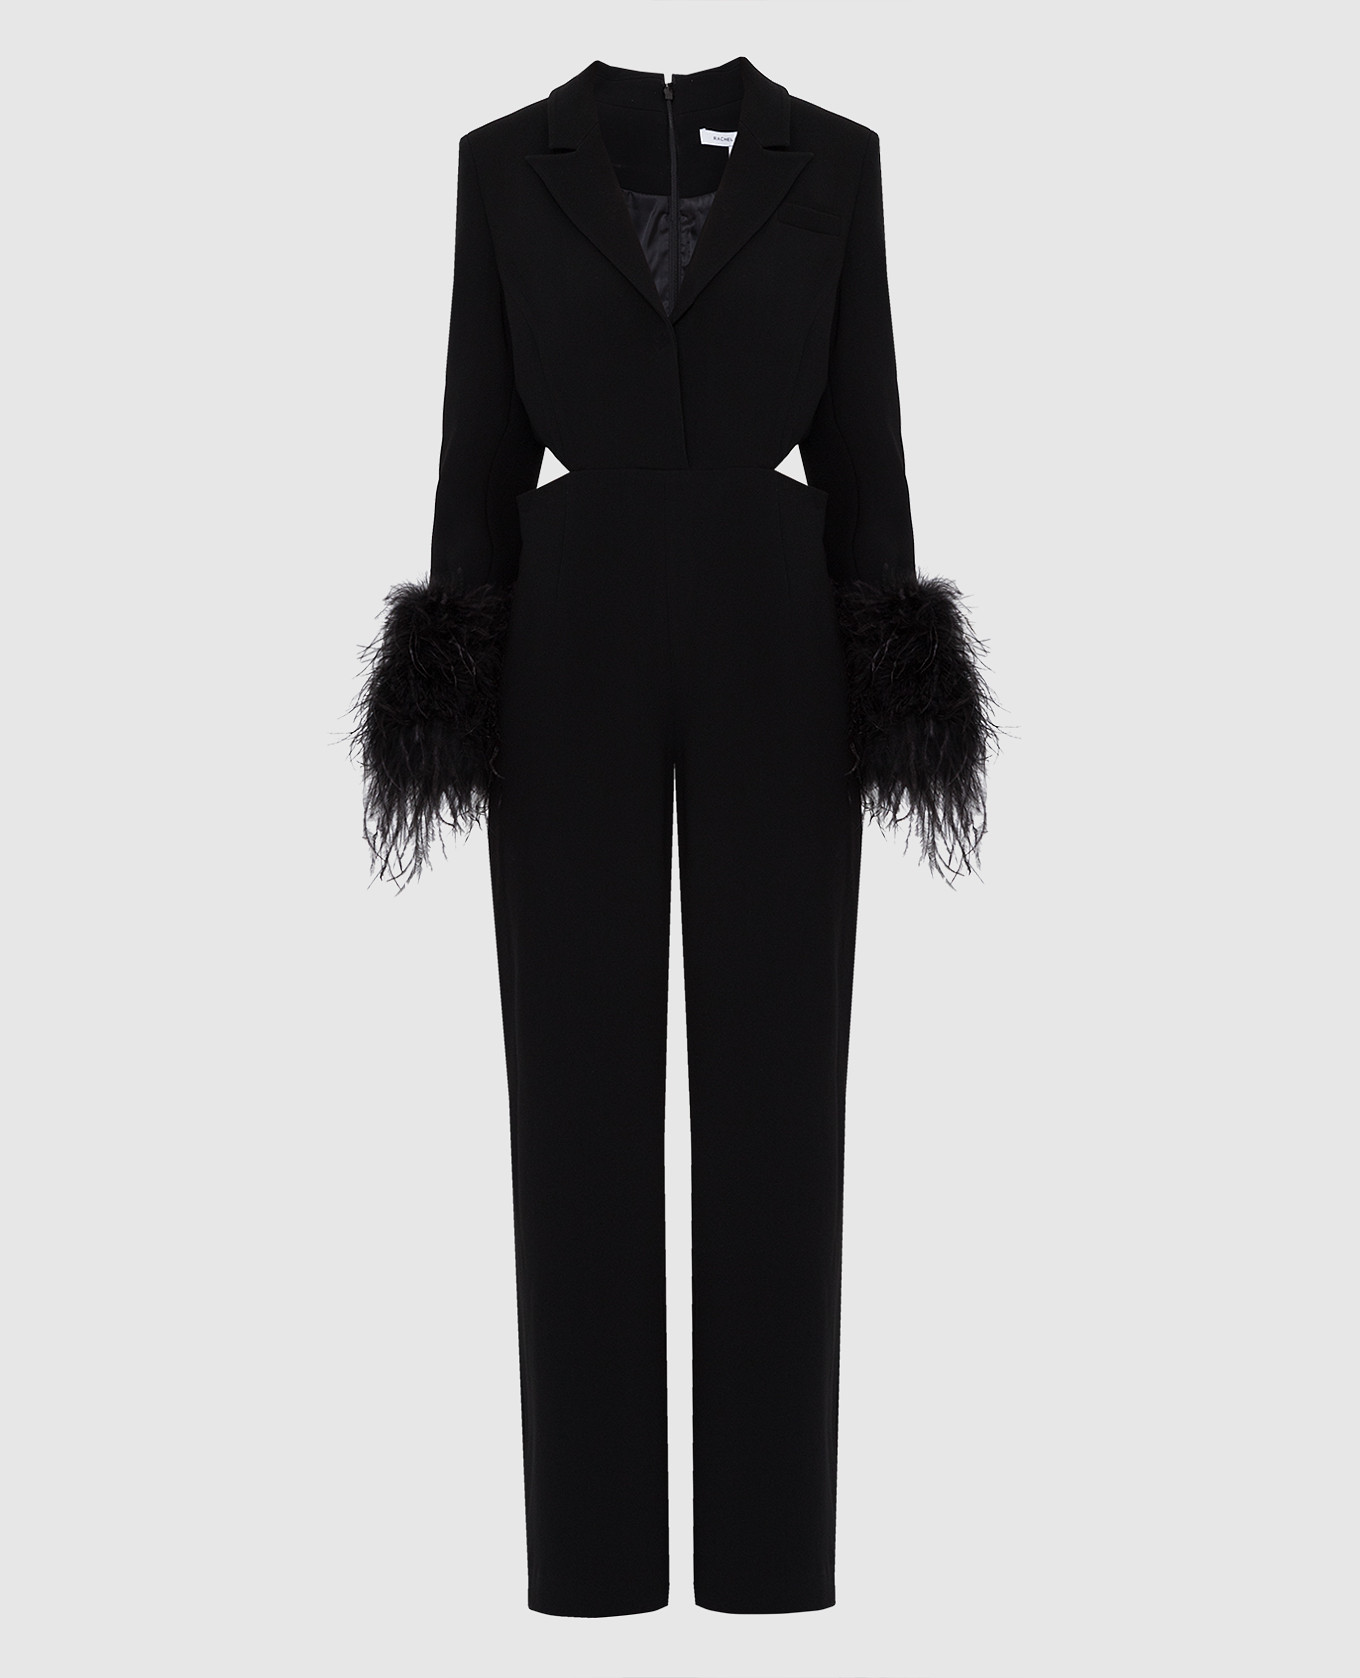 Black Silas jumpsuit with cutouts and feathers